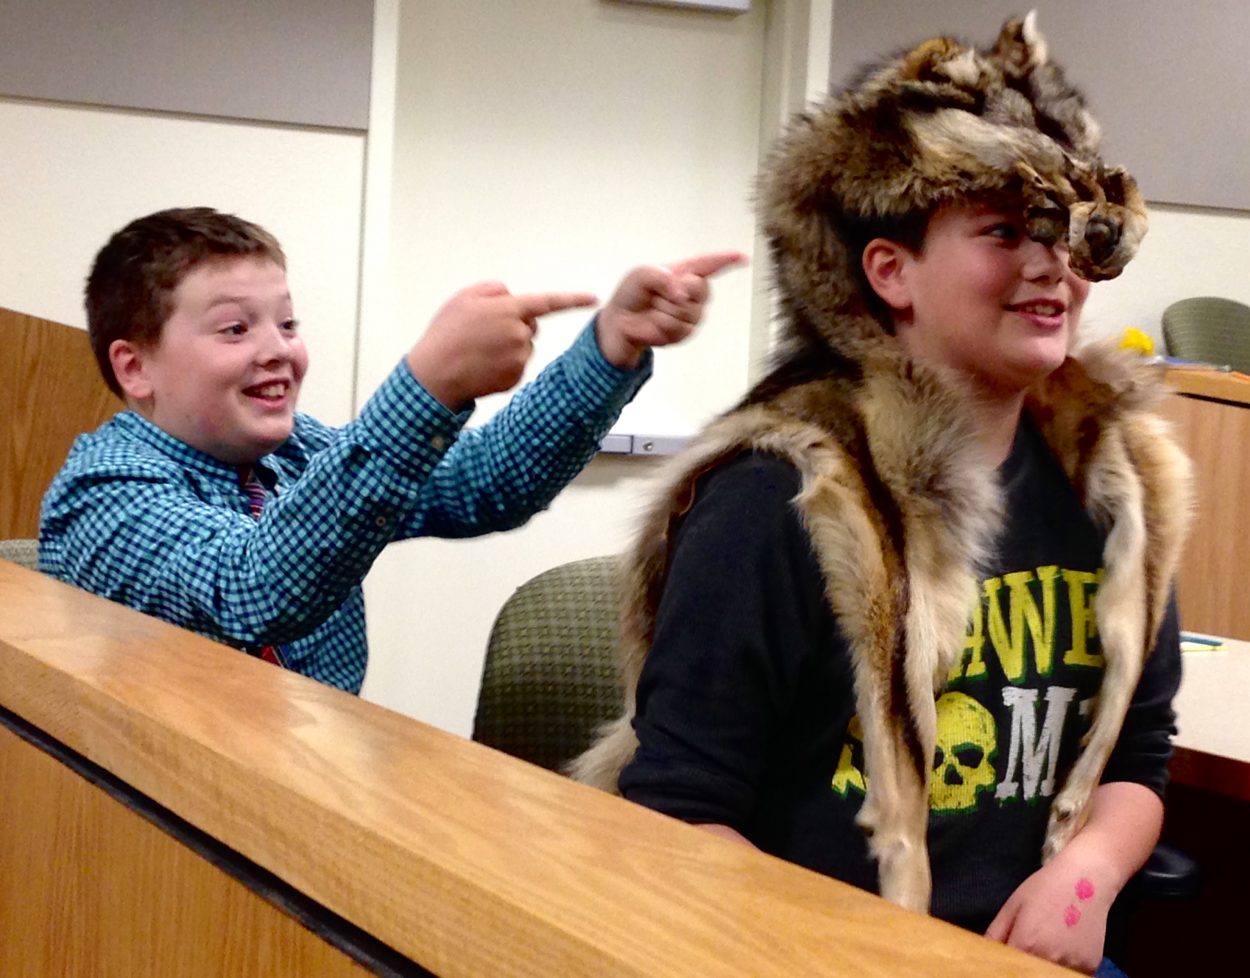 5th graders get first hand experience at the courthouse